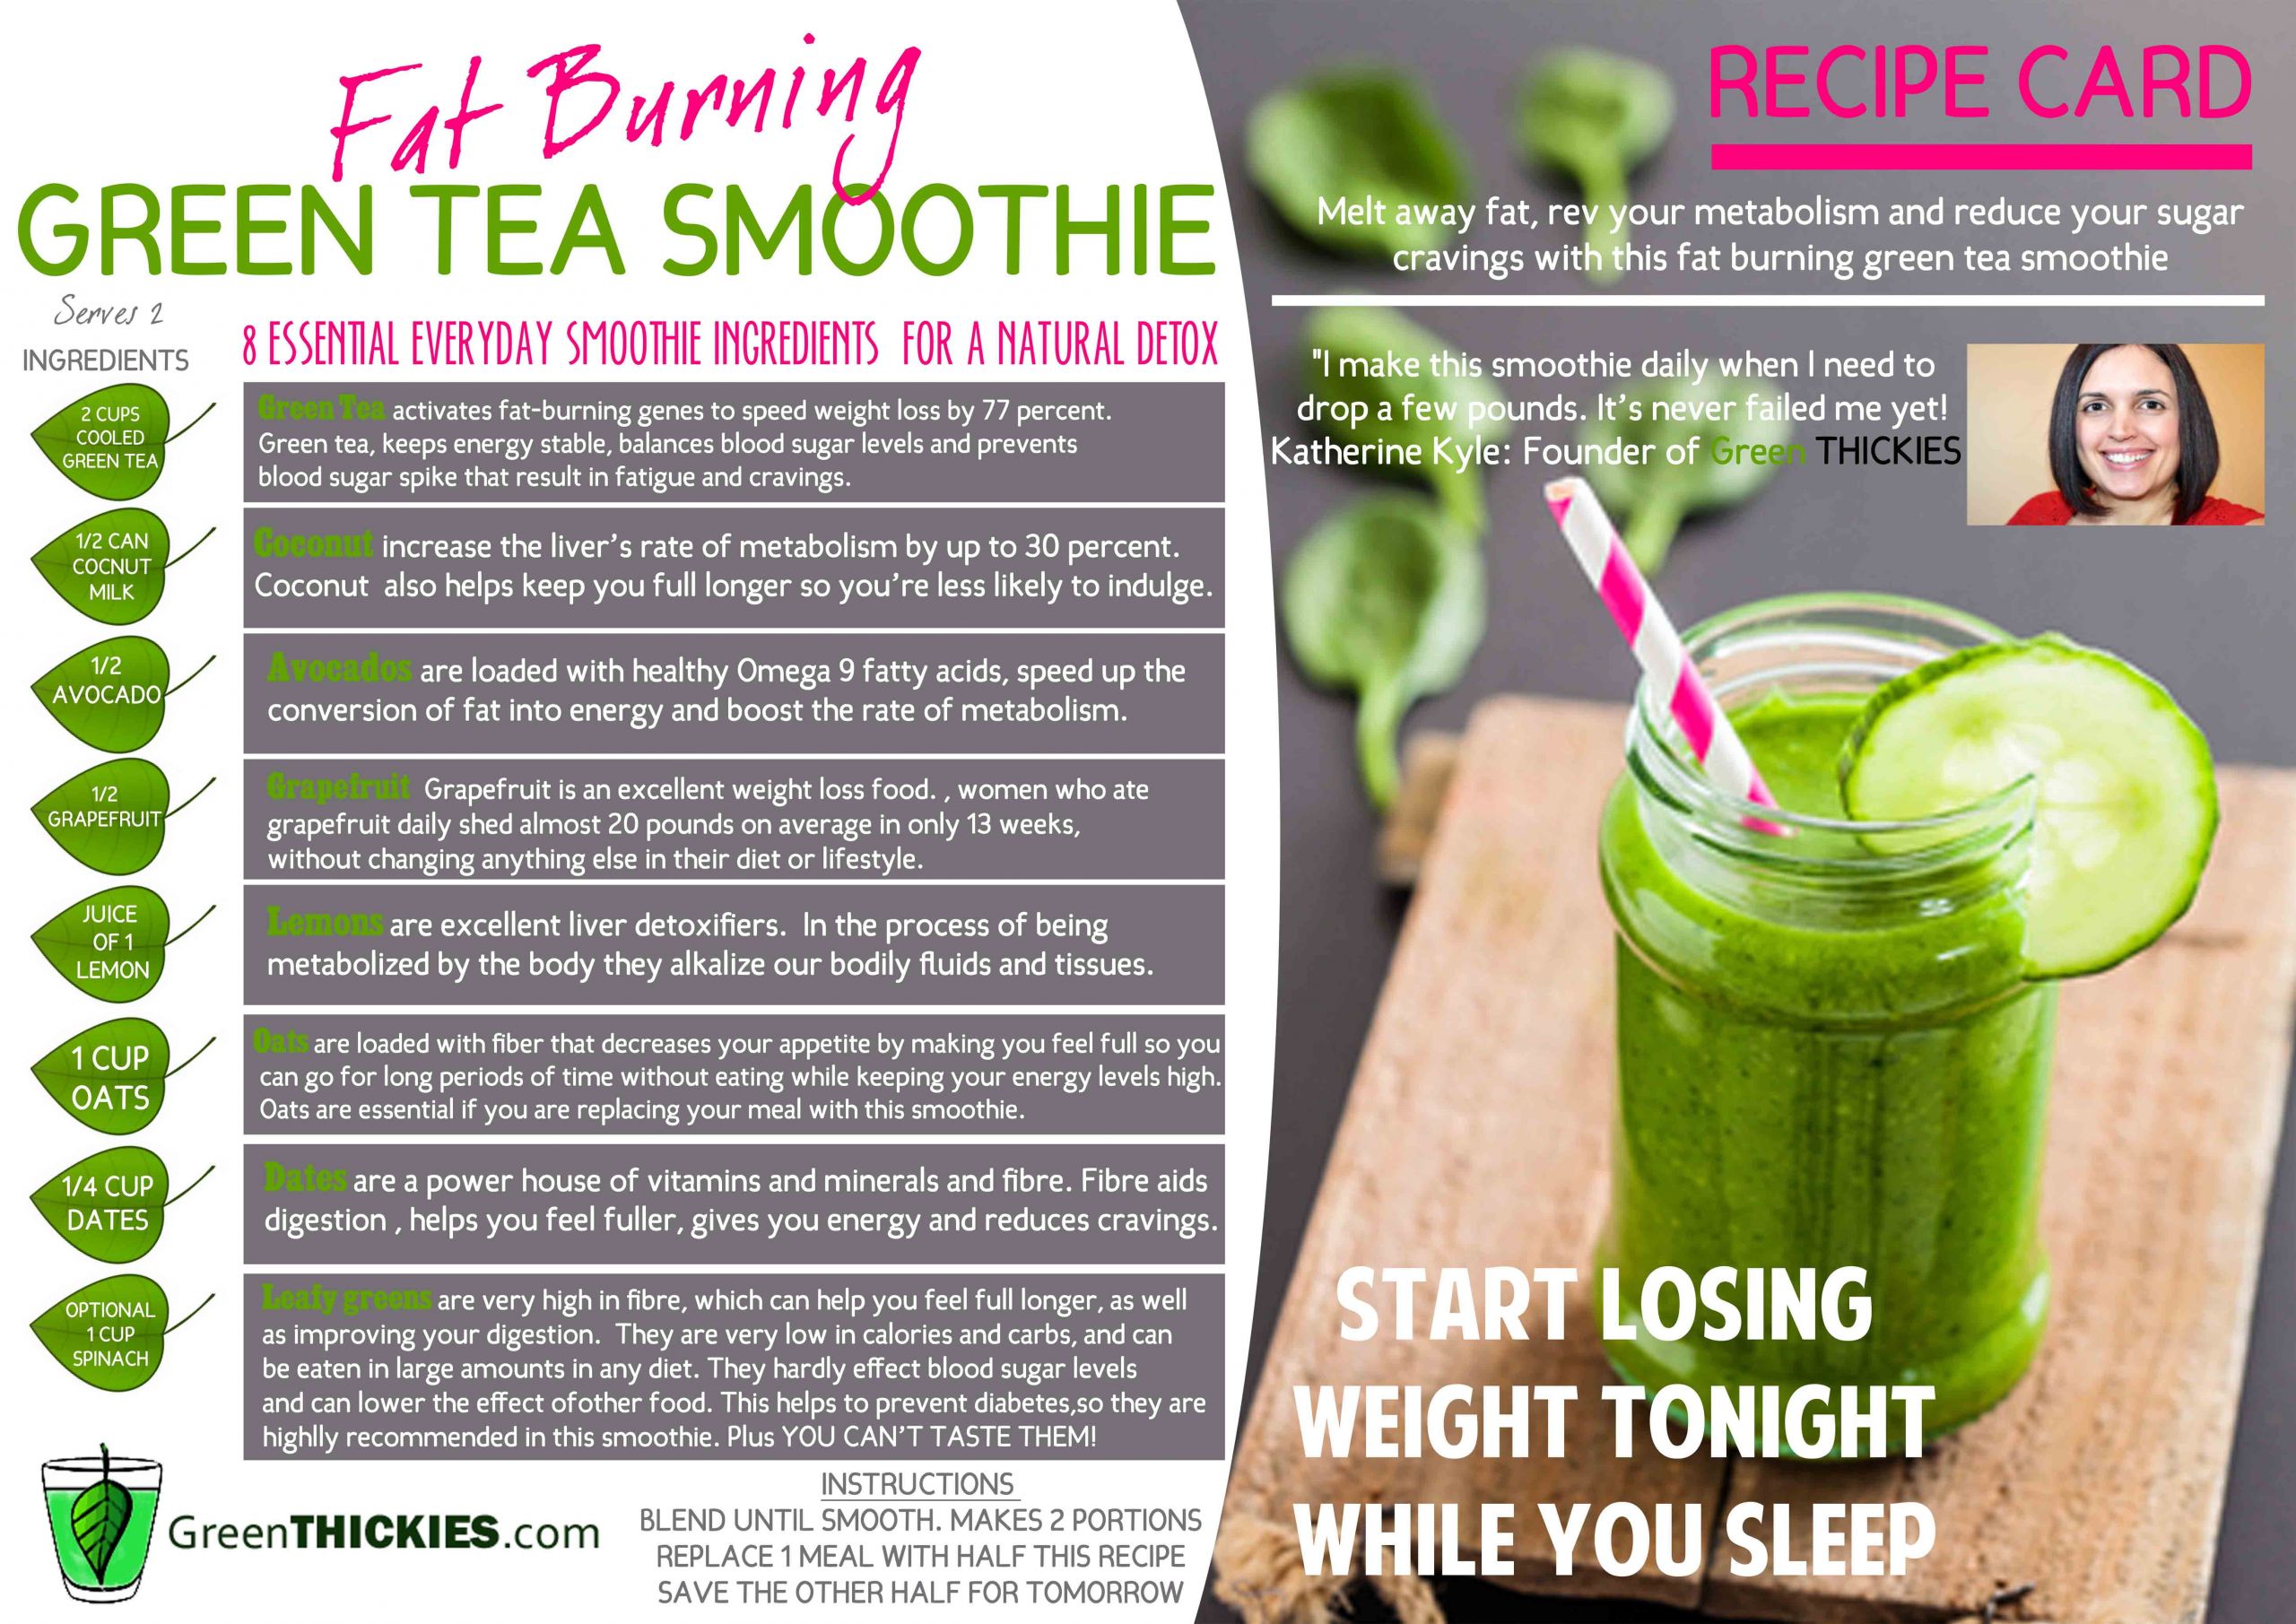 Green Smoothie Weight Loss Recipes
 How I lost 56 Pounds with the Green Smoothie Diet and